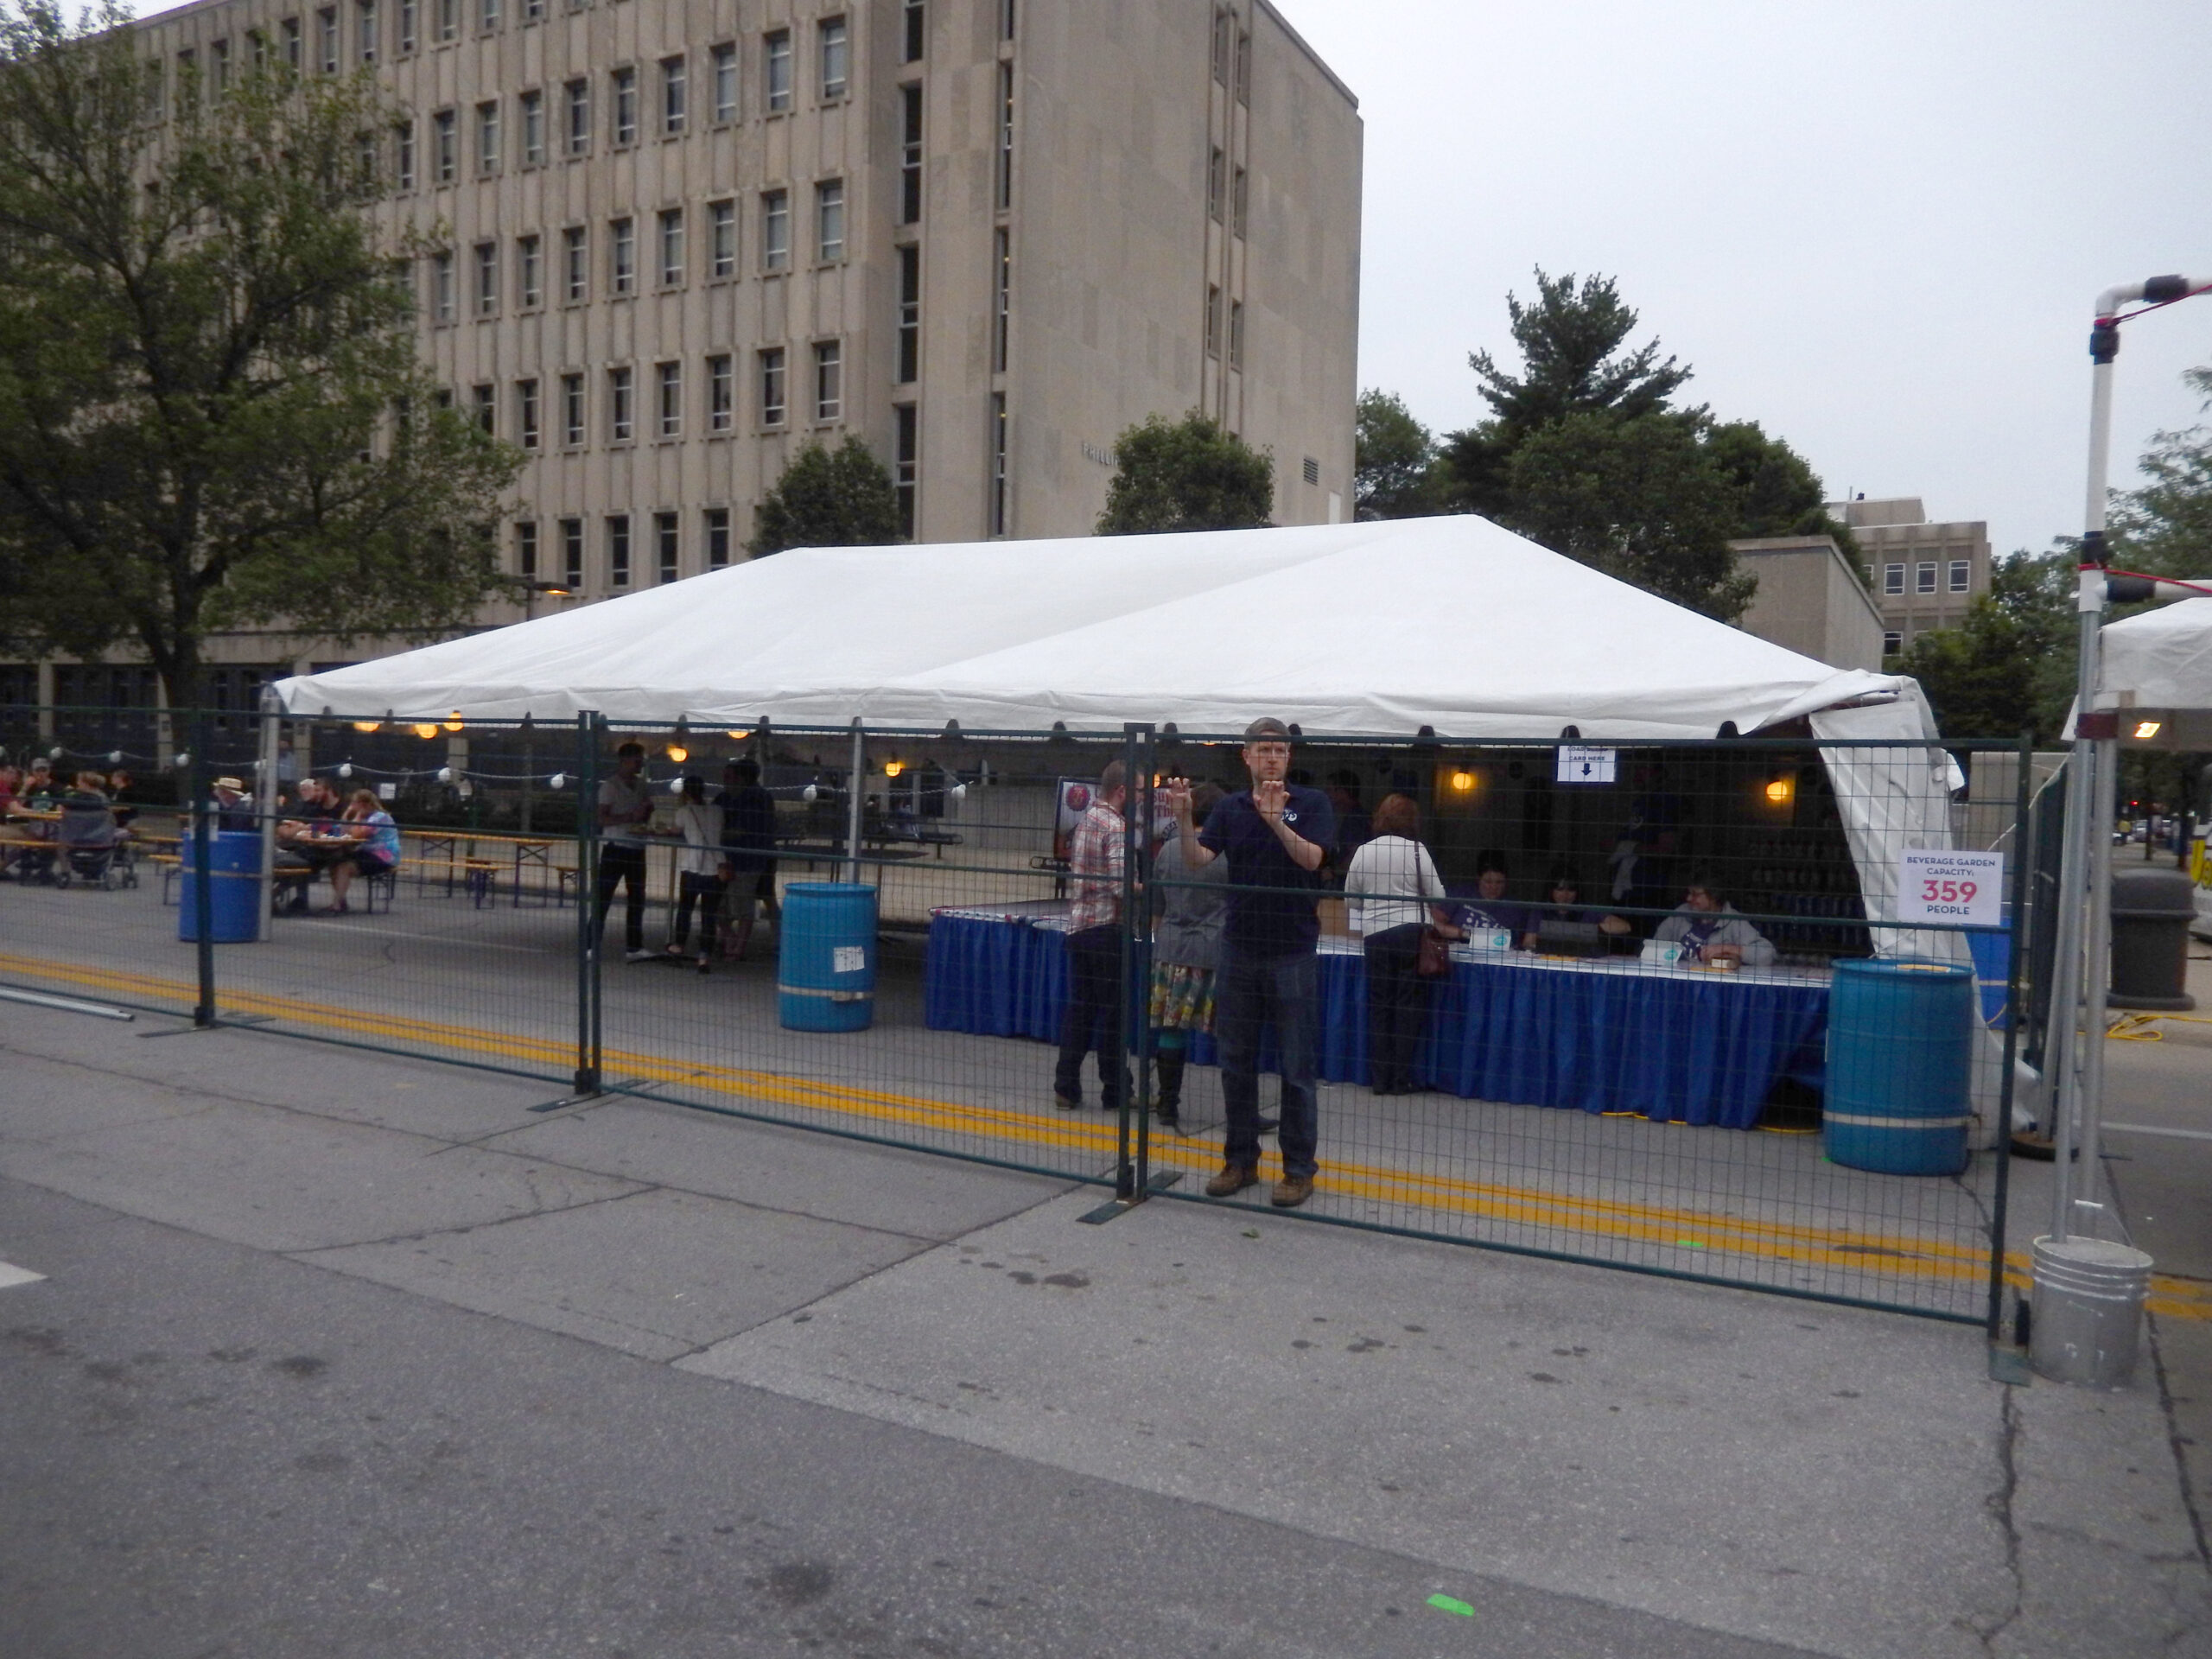 Just opened beer garden at the 2015 Iowa City Jazz Festival